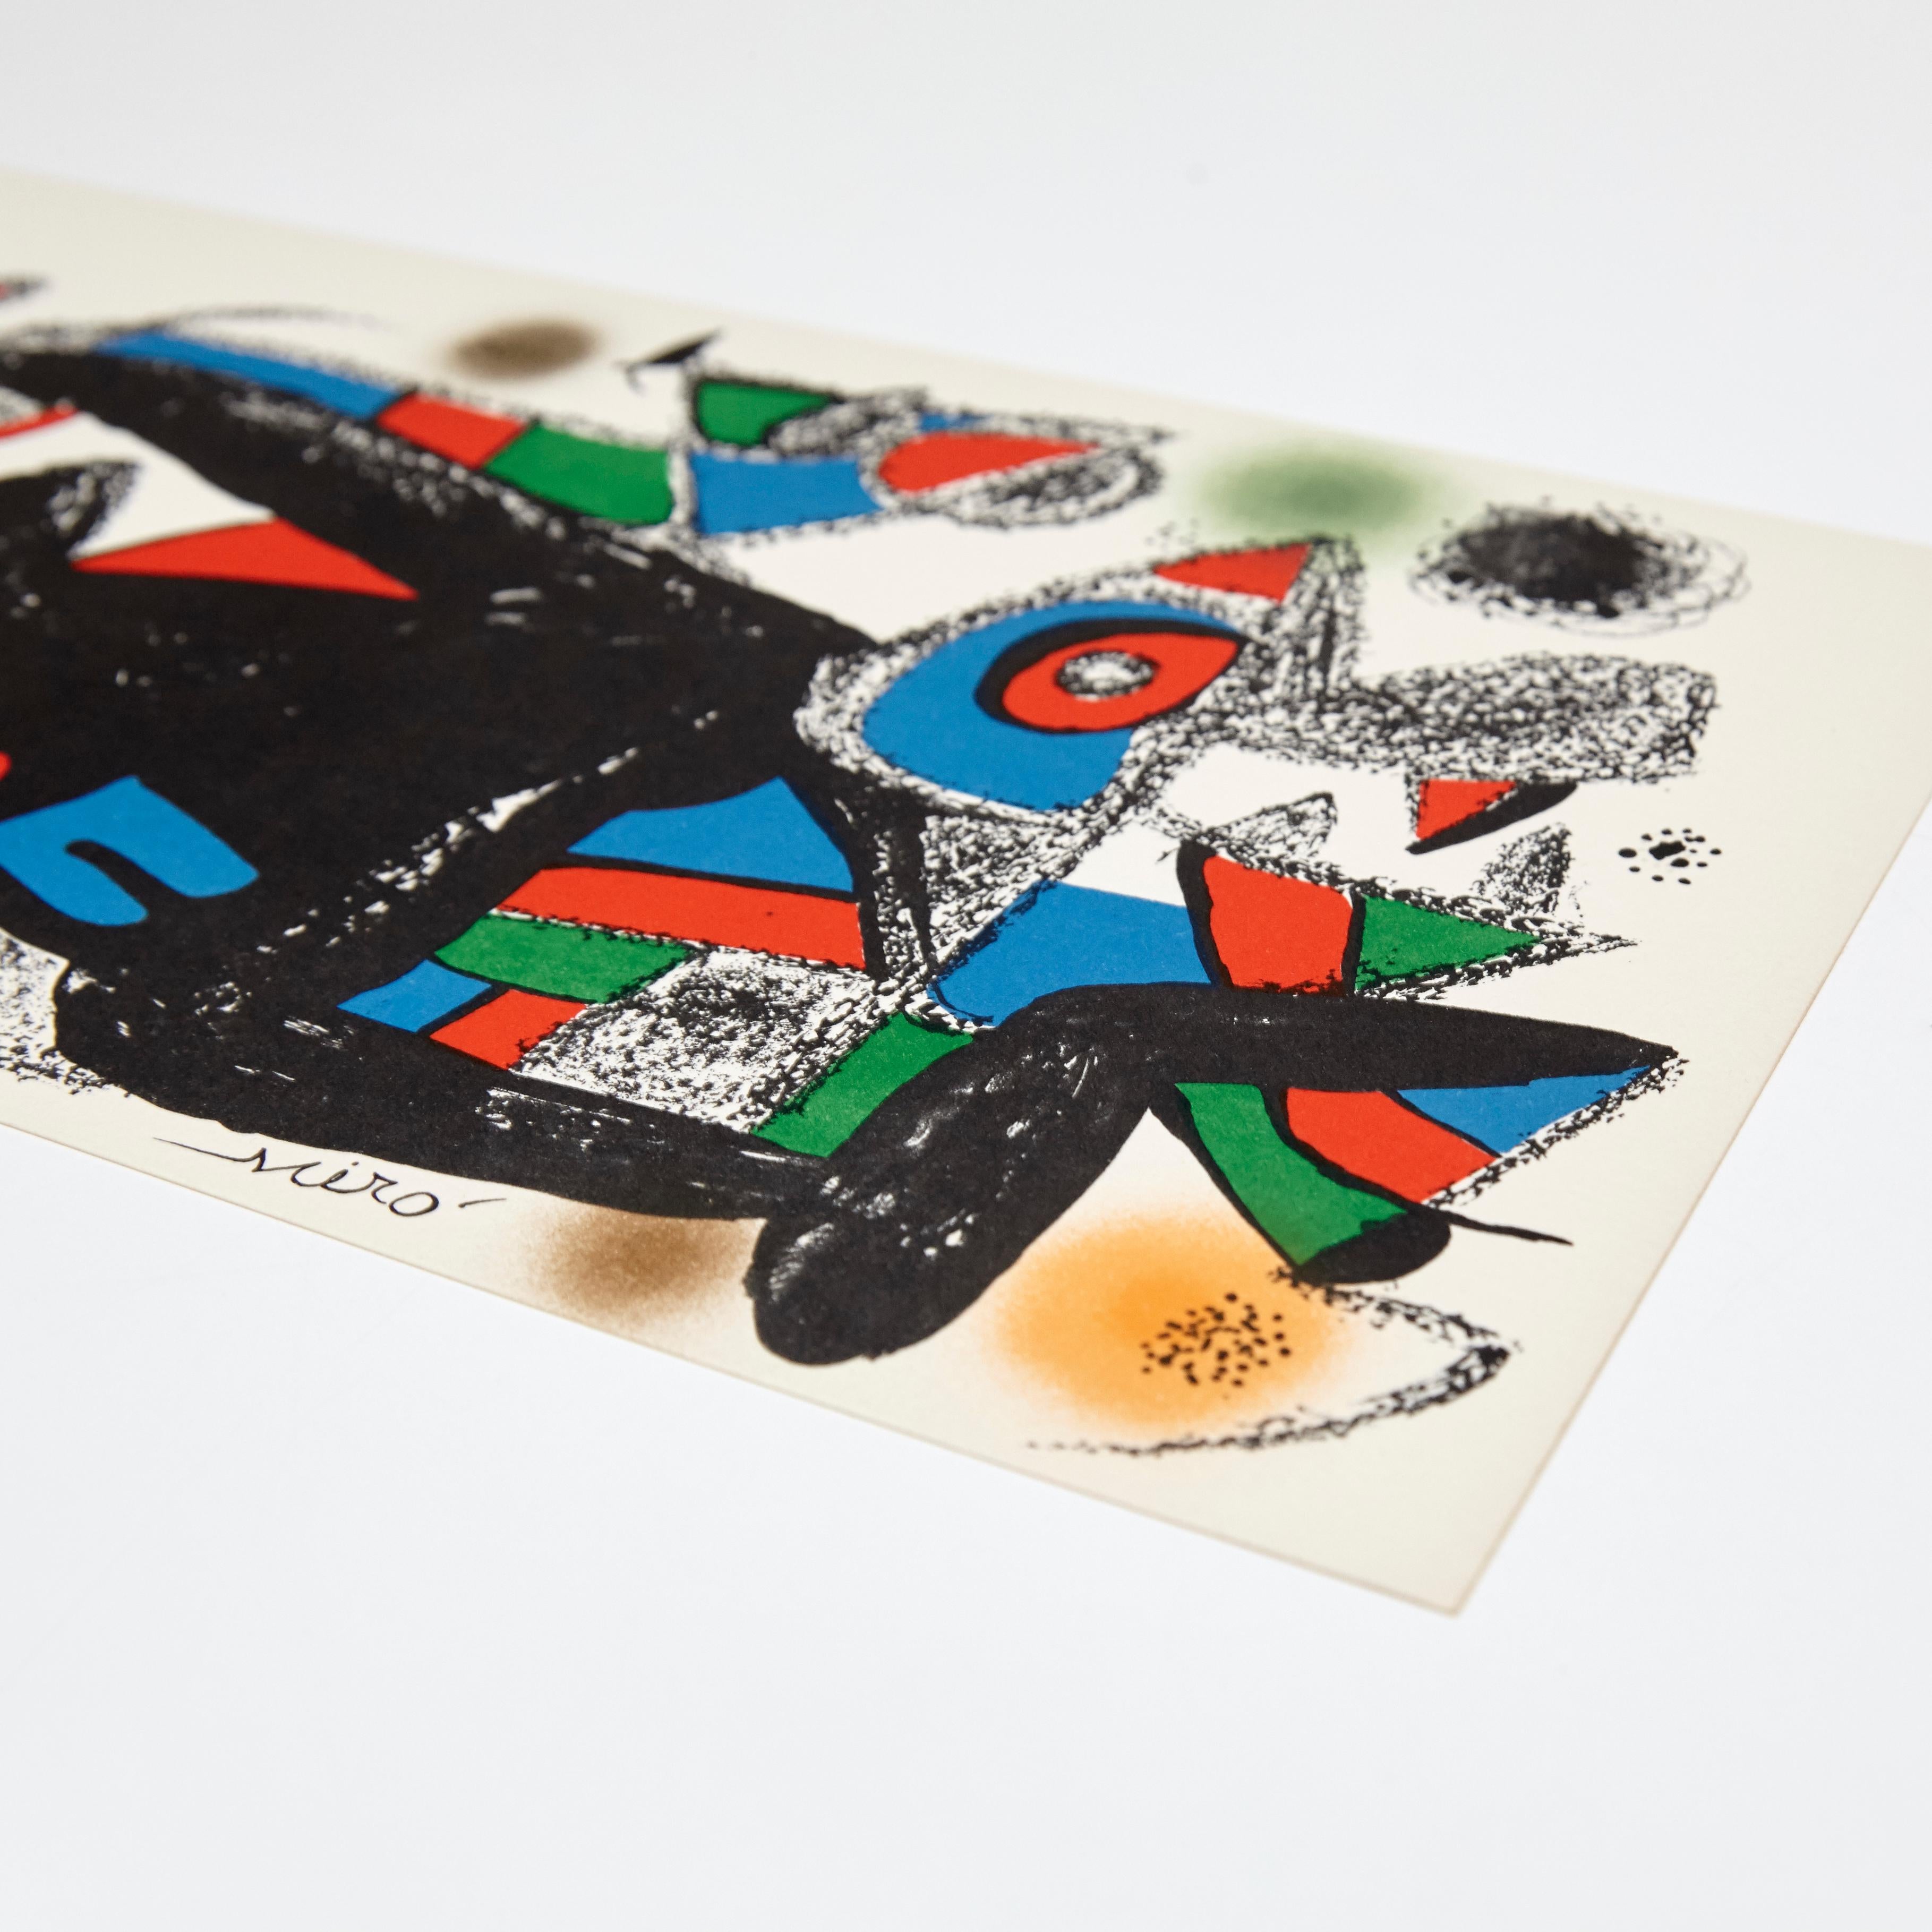 Lithograph on Guarro paper
Edition of 1.500 
Signed by Joan Miró on the plate


This lithography by Joan Miró, dated 1974, features Jacques Dupin Mirós text “Miró scultore” a testimony in itself of the close collaboration established throughout